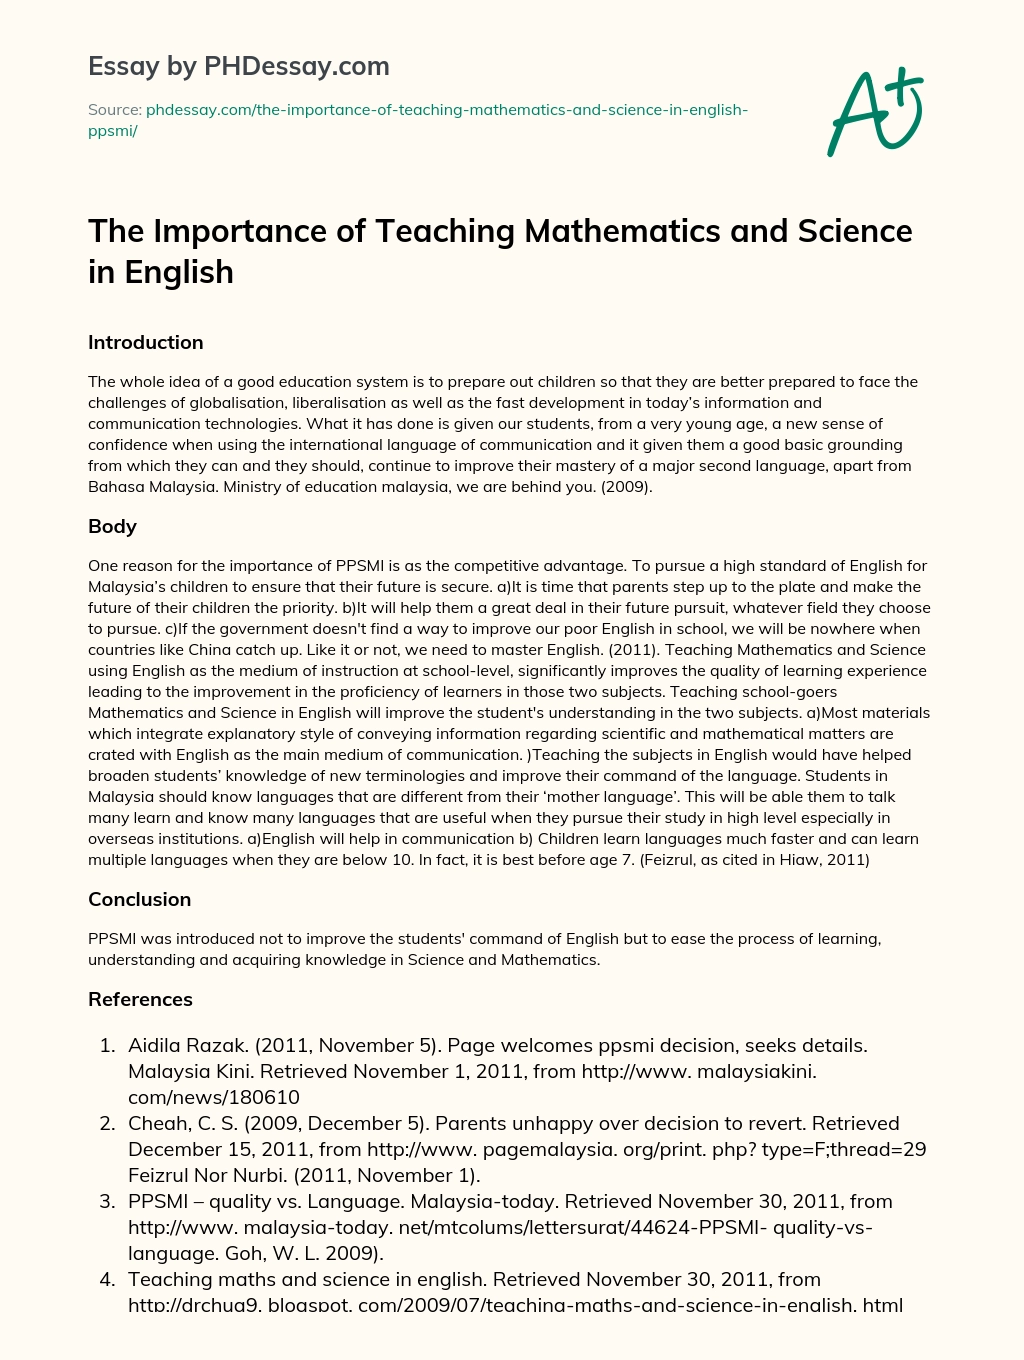 The Importance of Teaching Mathematics and Science in English essay